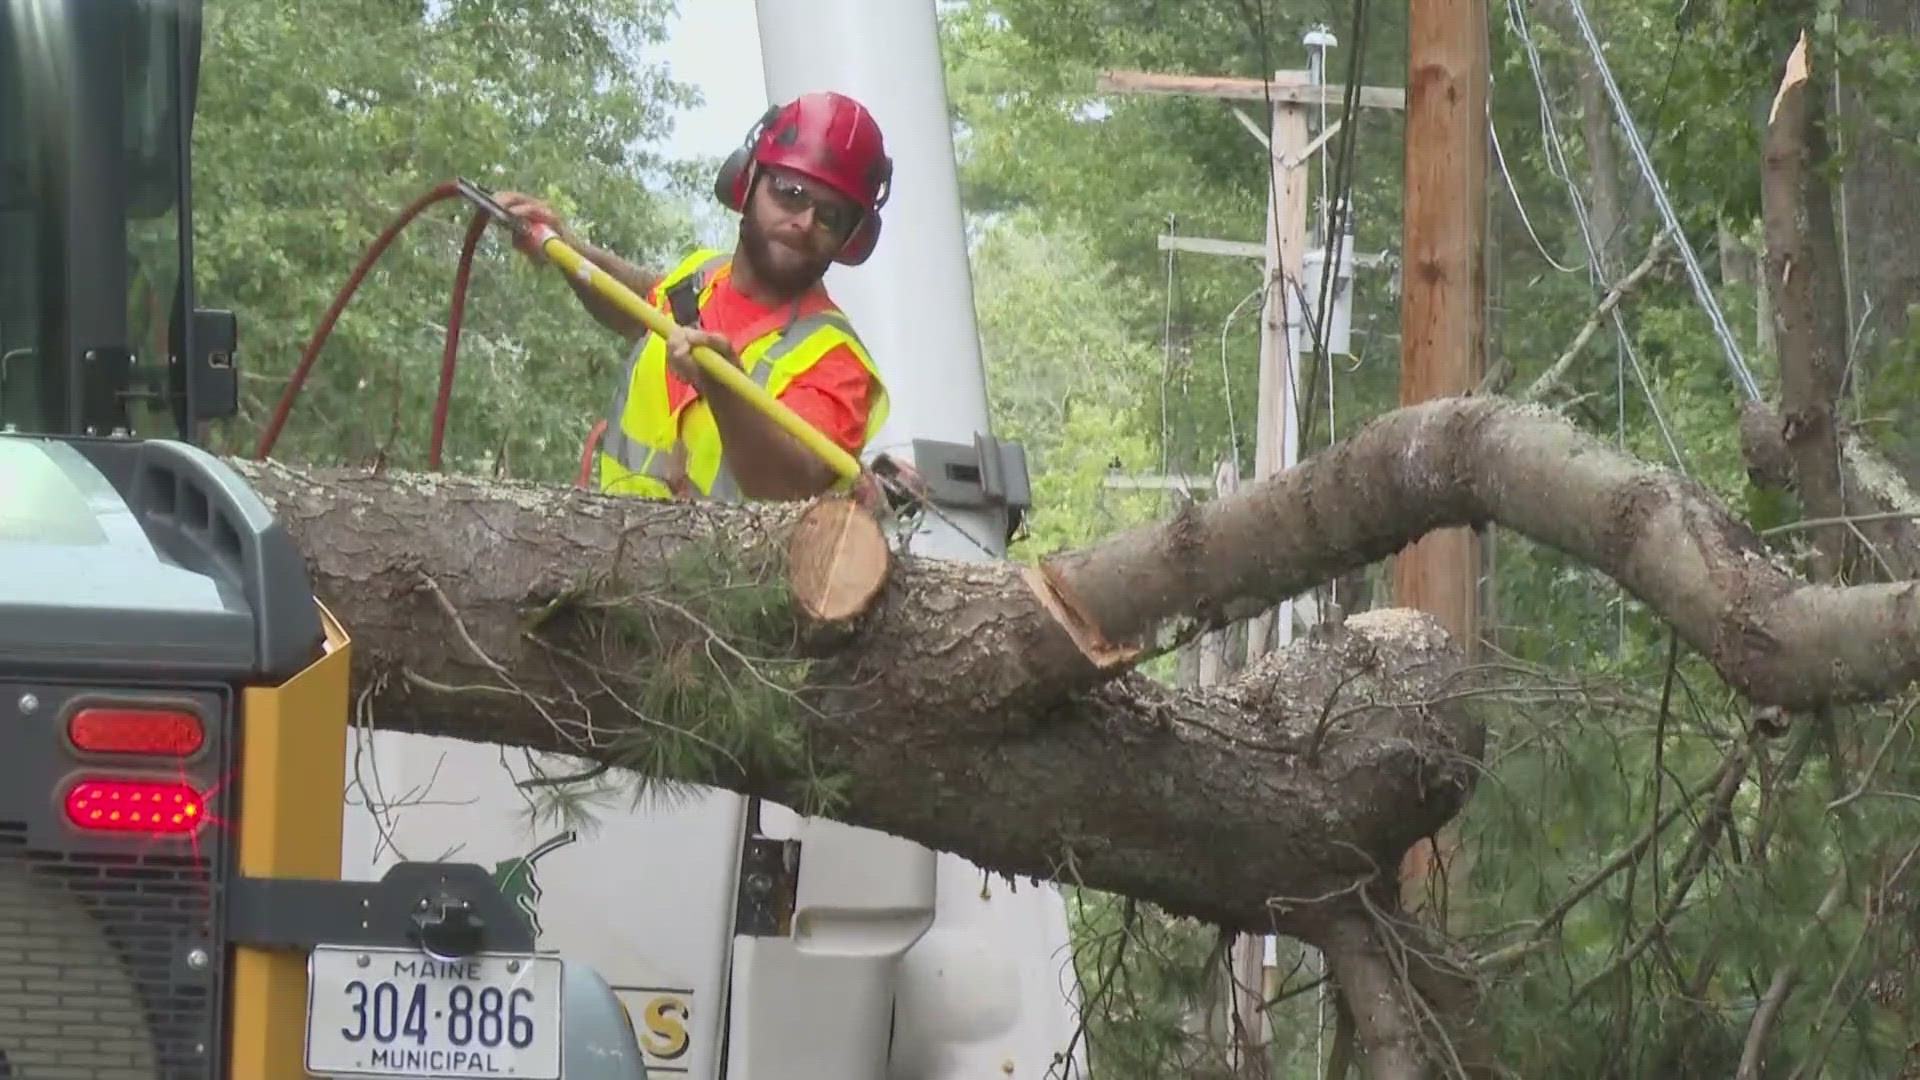 Peak impacts from the storm in Maine were expected between 3 and 9 p.m. One person has died from storm damage.